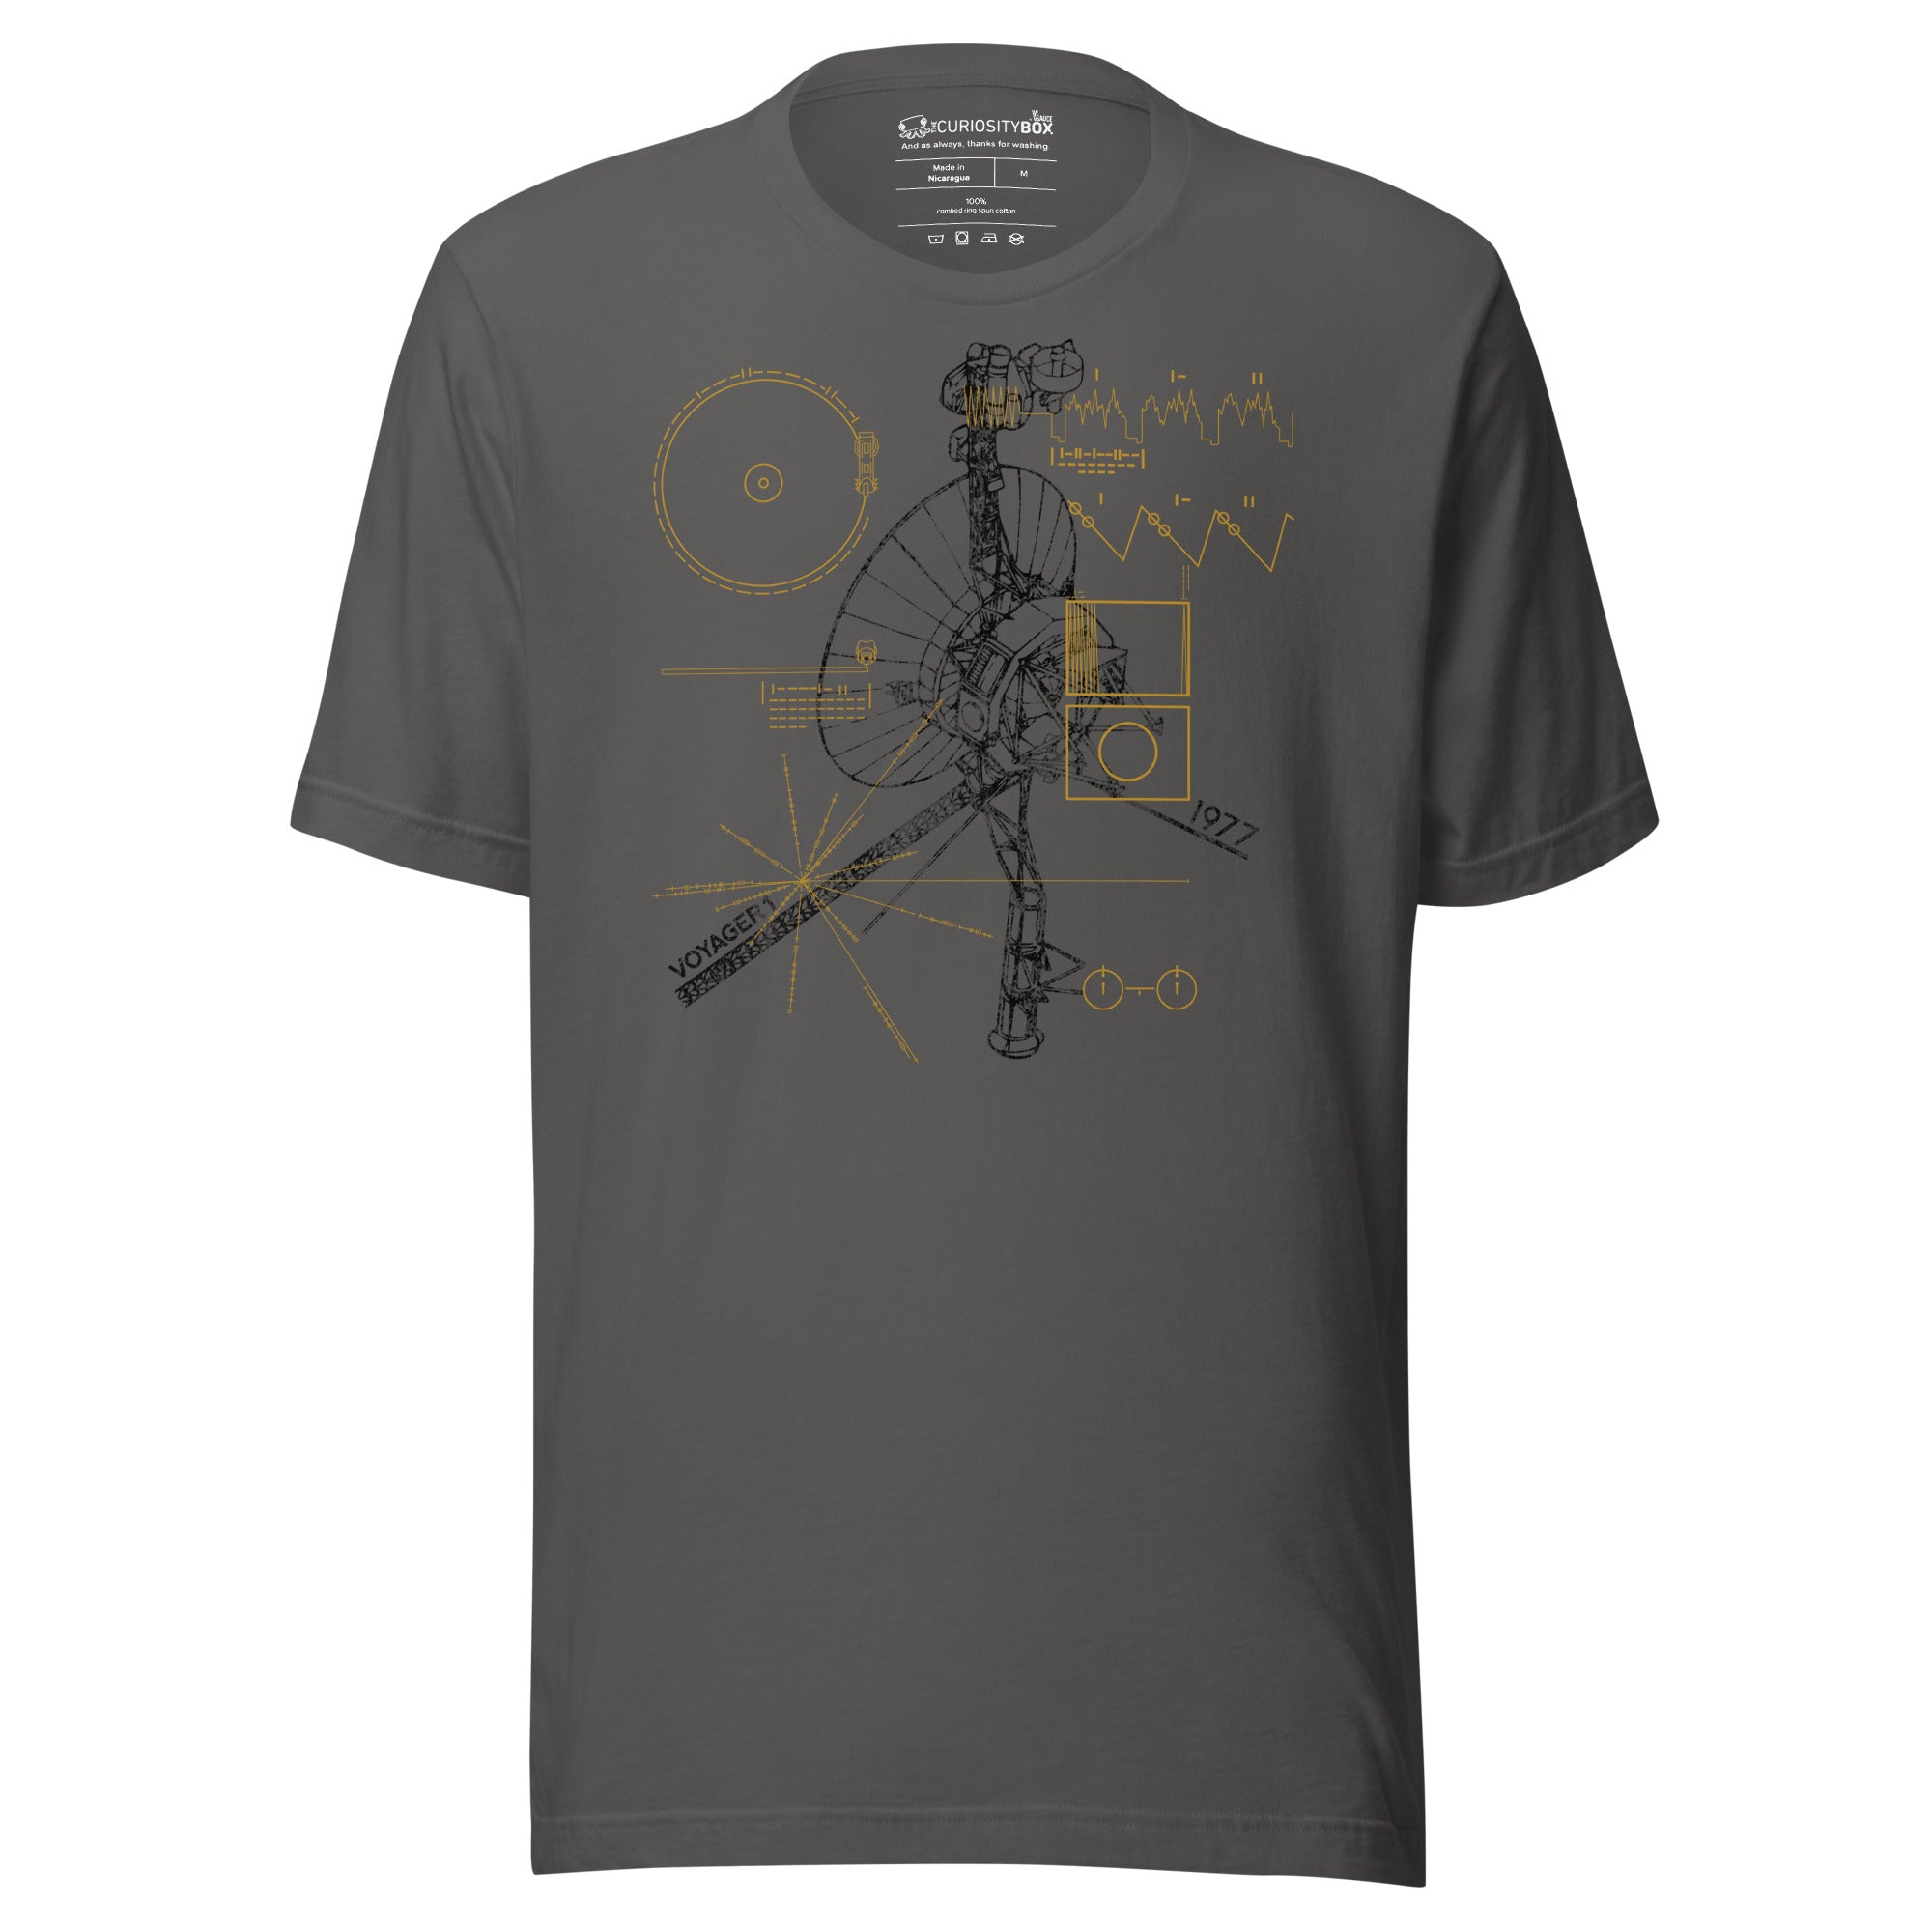 Voyager Golden Record T-shirt